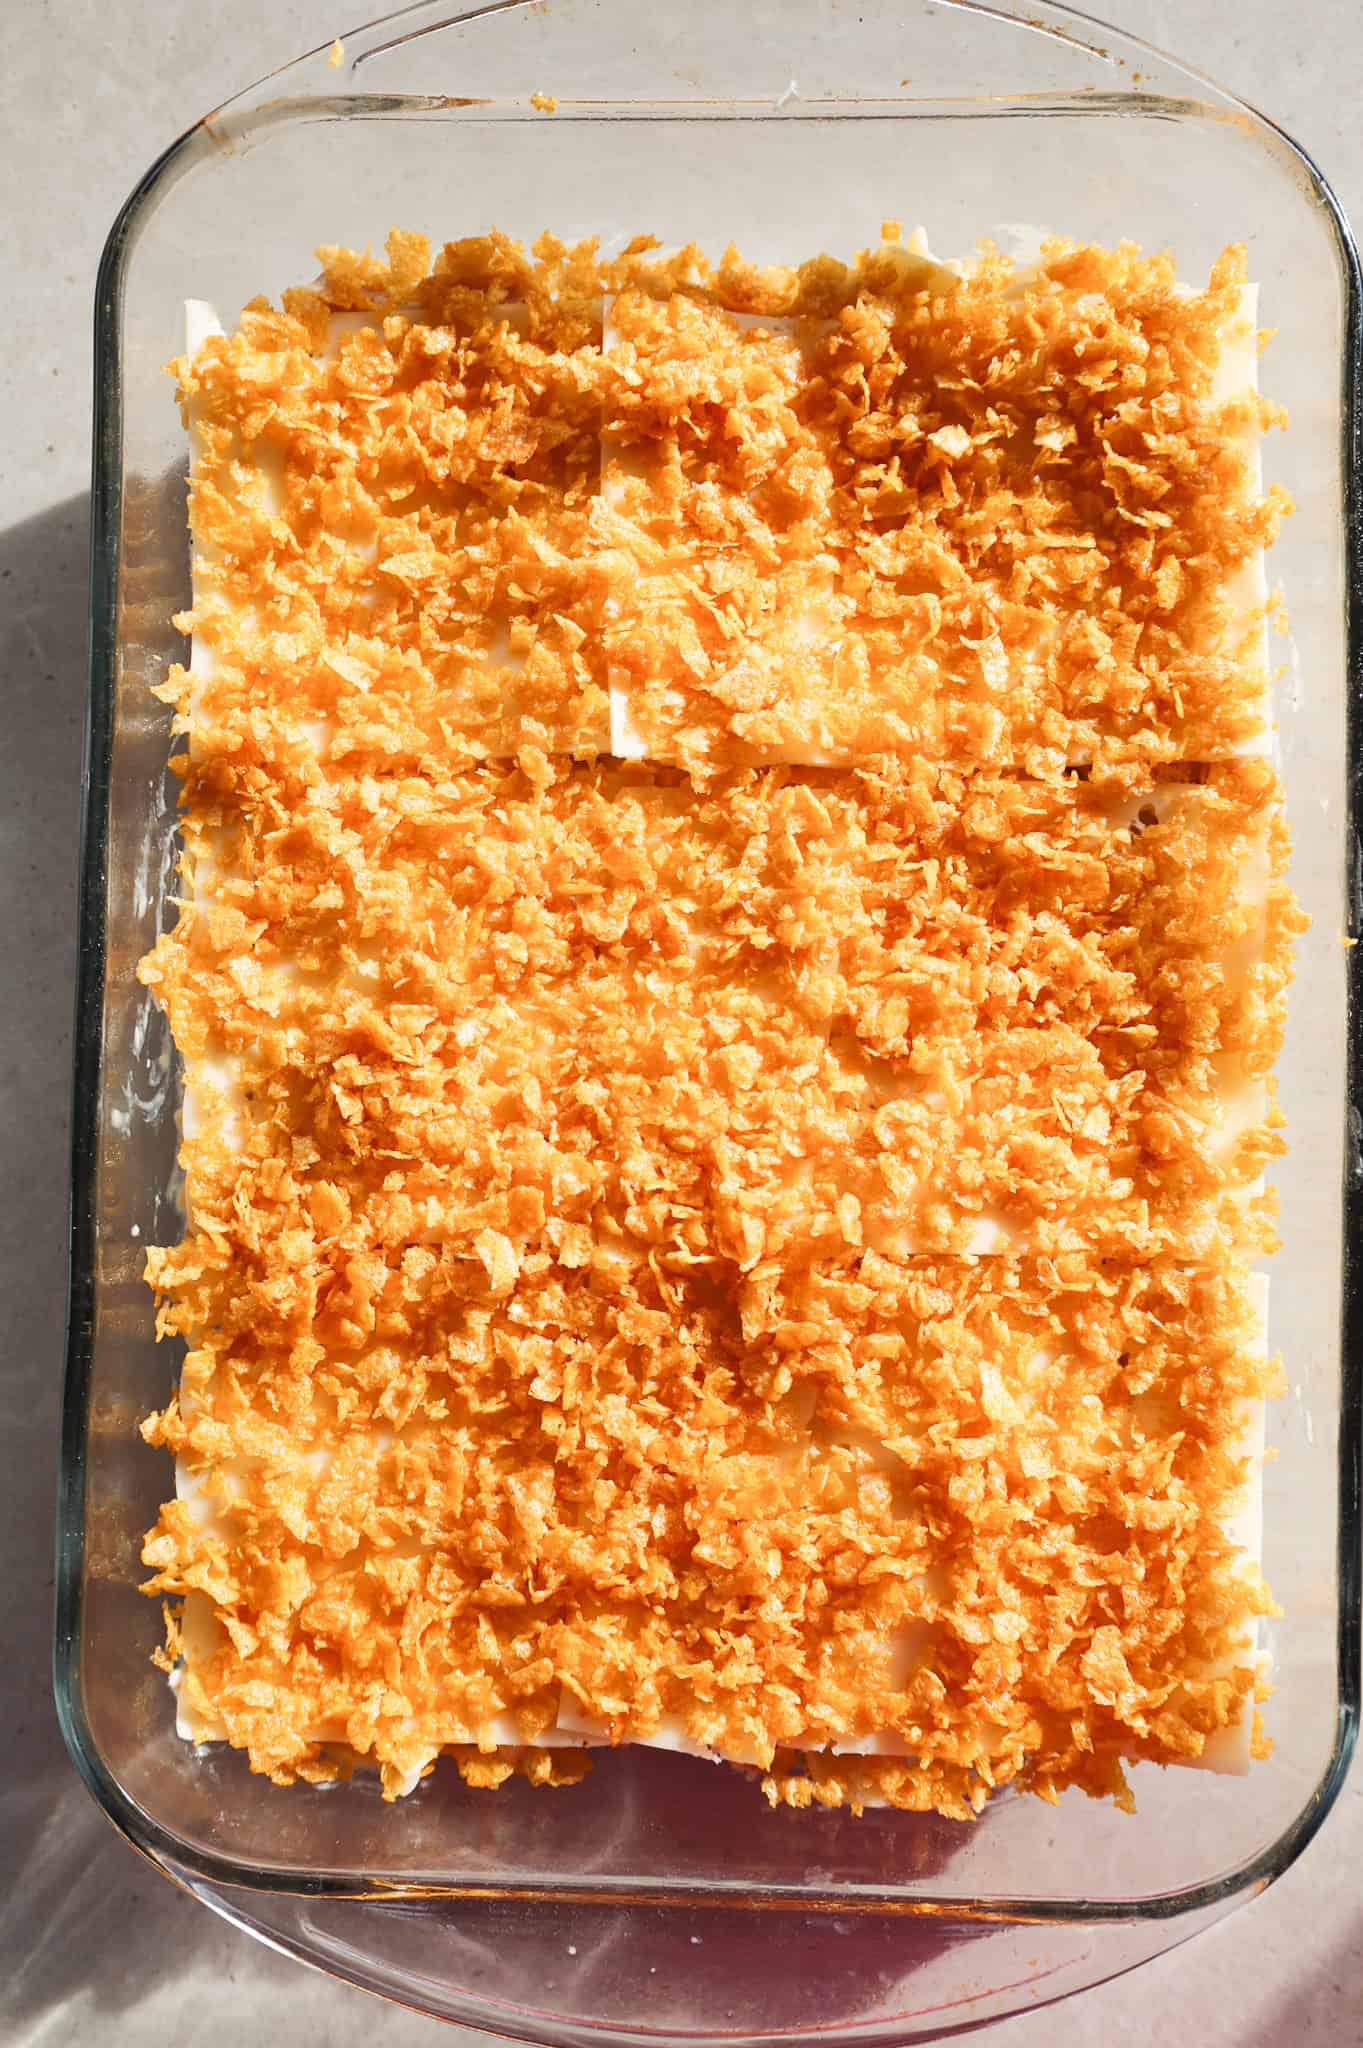 crumbled corn flakes on top of ham noodle casserole in a baking dish